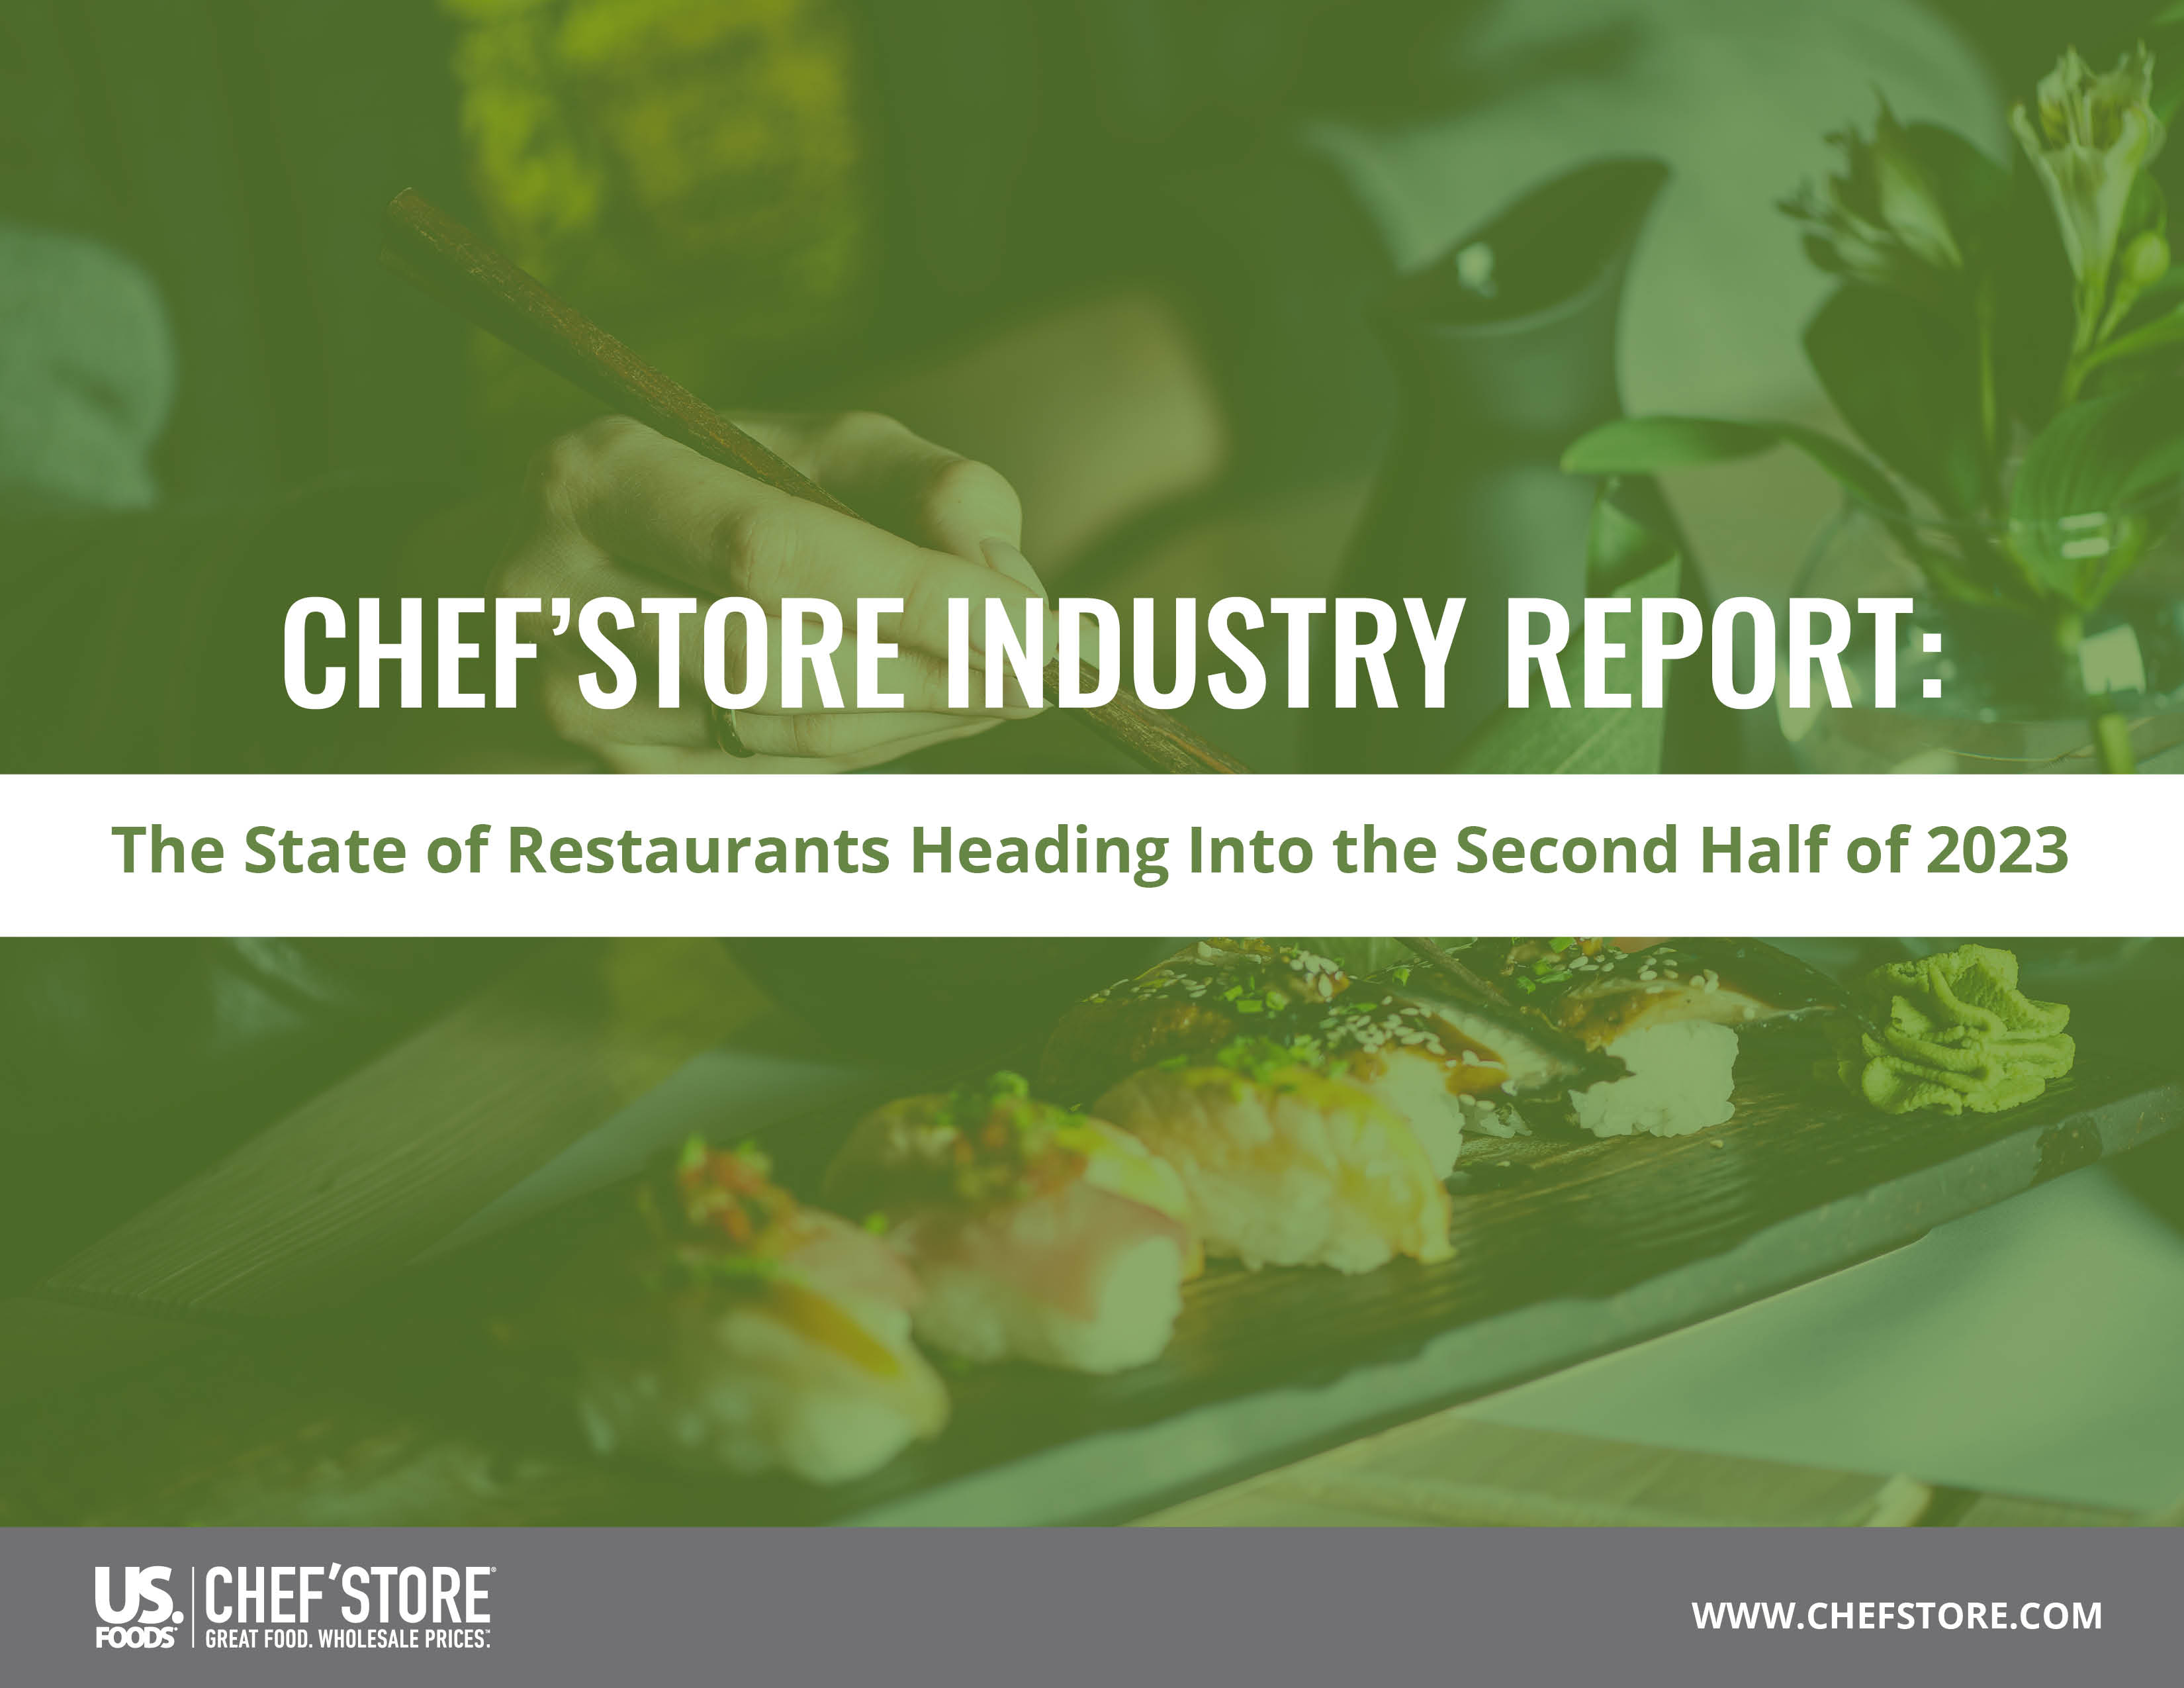 Industry Report: The State of Restaurants Heading Into the Second Half of 2023